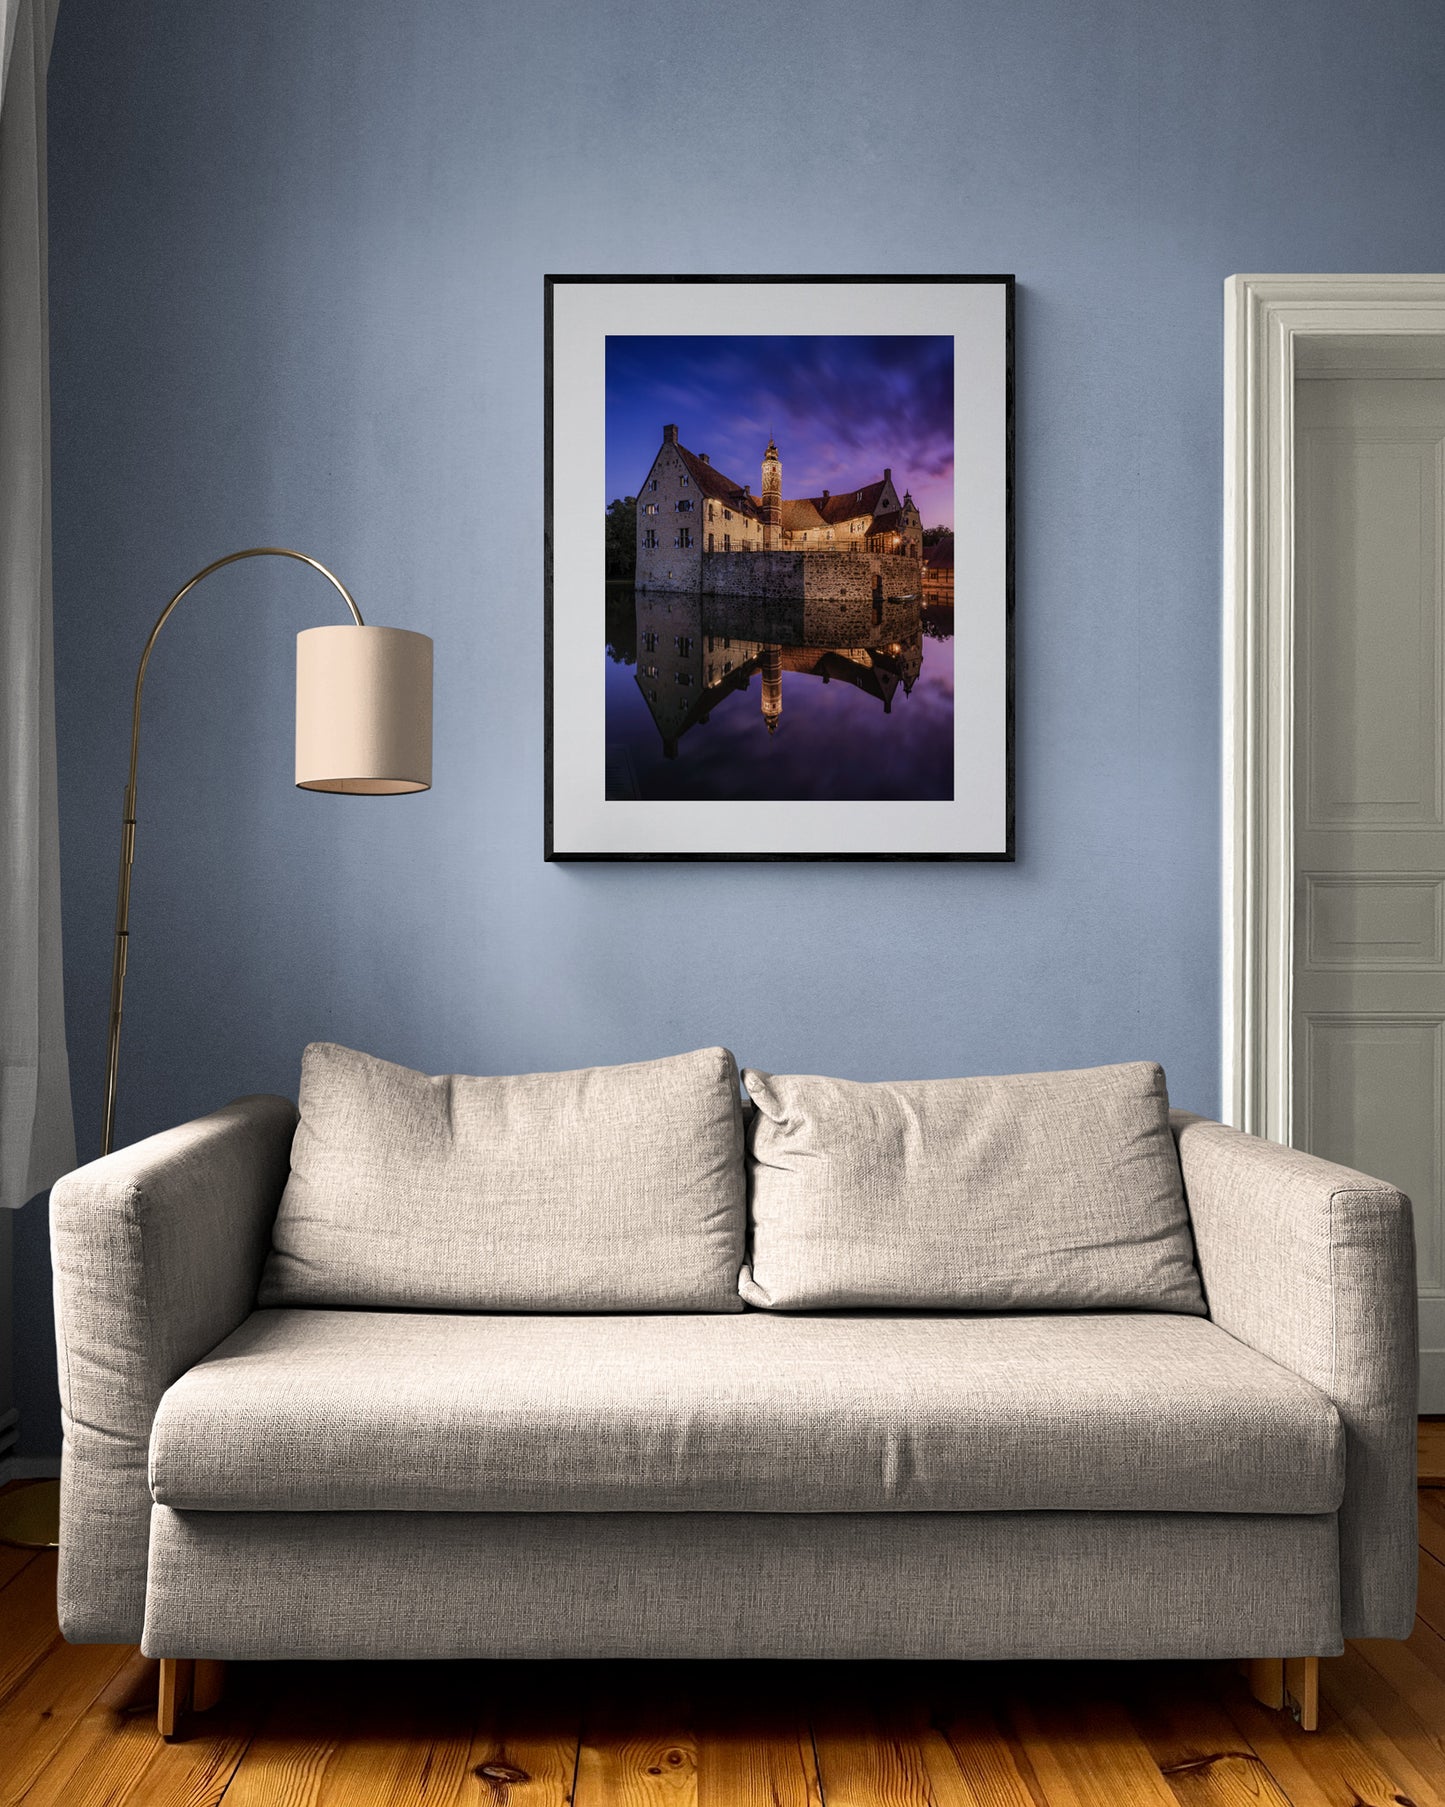 Image Title: Time flies by Photographer: Marcus Danz Location: Lüdinghausen, Germany Image description: Vischering Castle, my home town‘s medieval jewel, shines in all its beauty on this perfect summer evening shortly after sunset. High quality Fine Art print up to 36 inch / around 90 centimeters on Hahnemühle paper available. Large variant in living room.